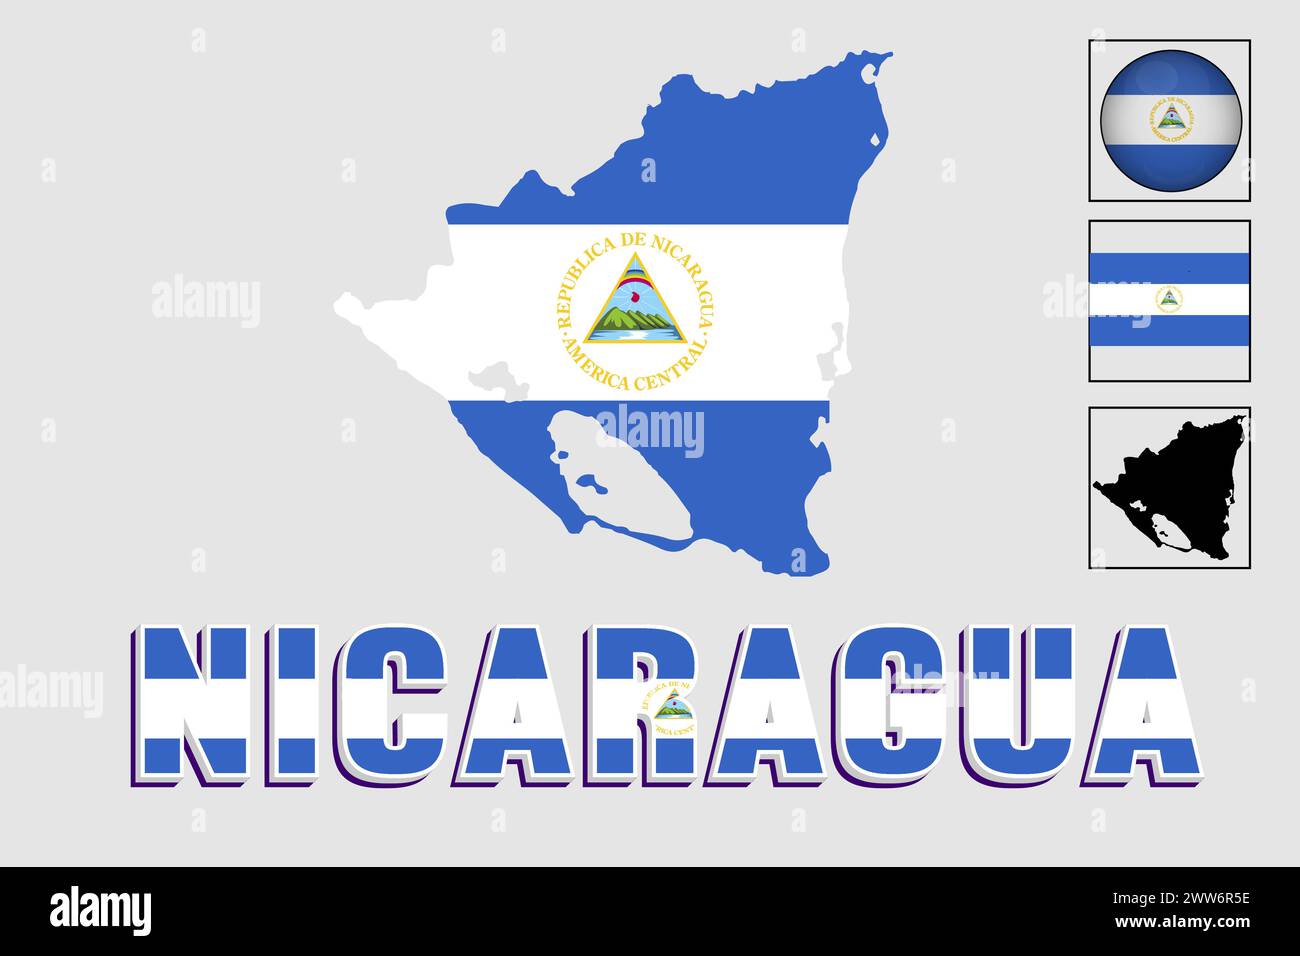 Nicaragua flag and map in a vector graphic Stock Vector